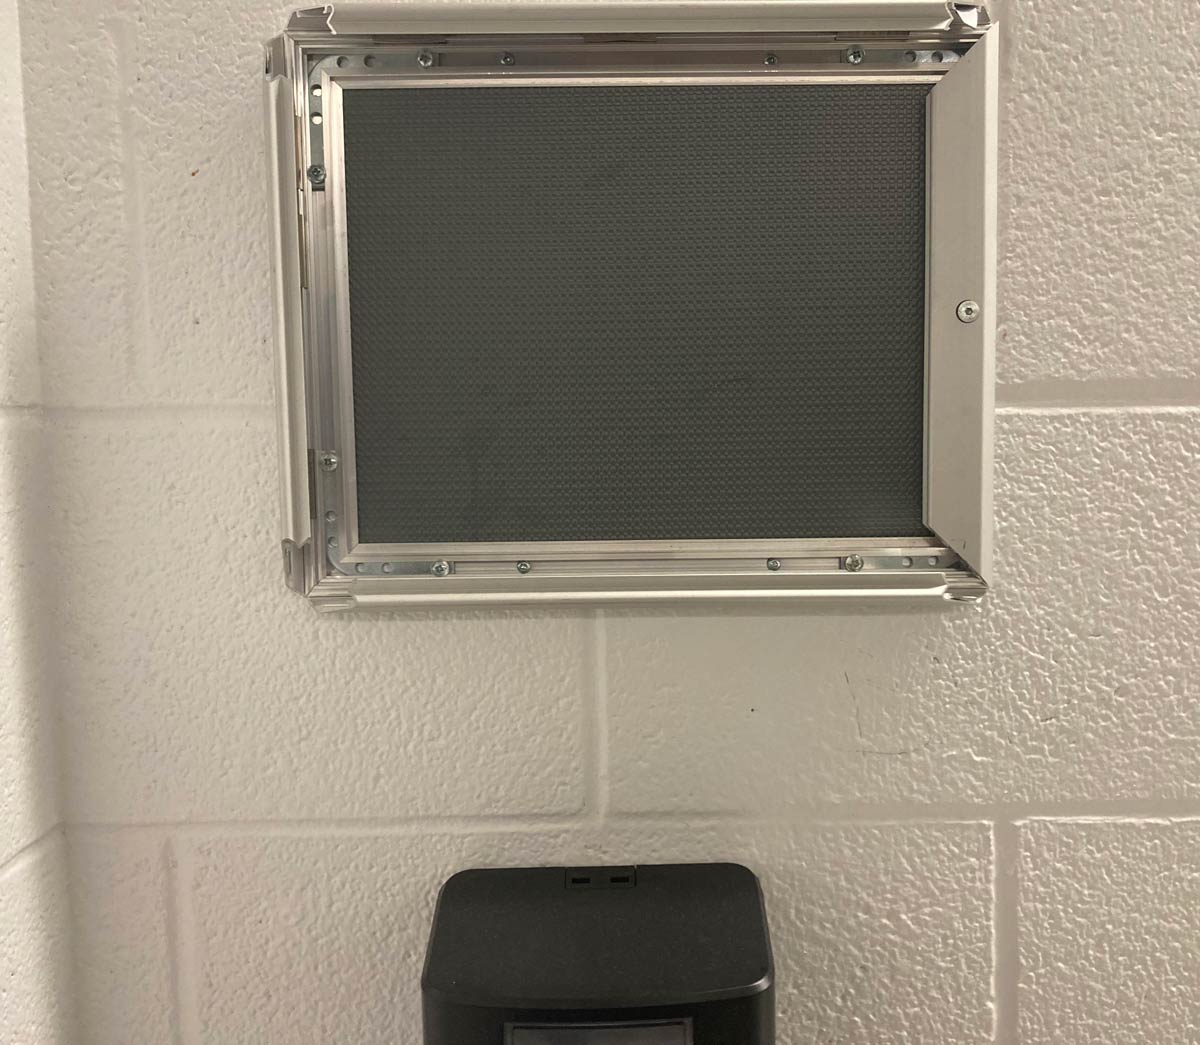 Student stole the “Students caught stealing will be suspended” sign from the bathroom